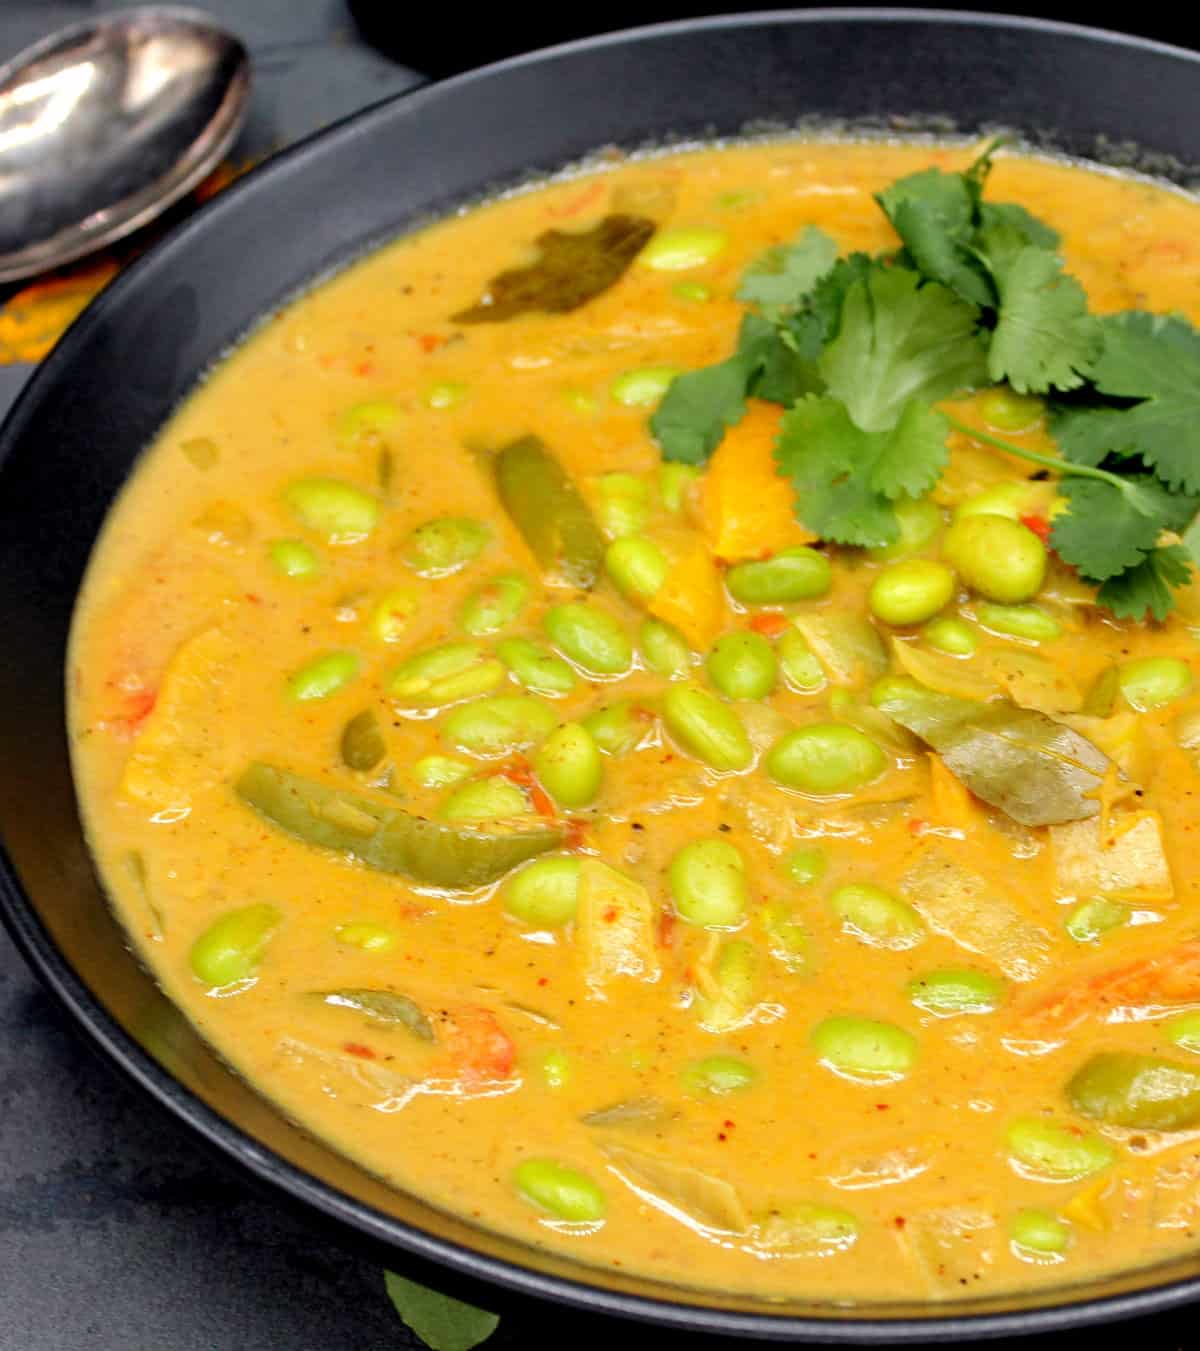 A close up of edamame beans curry or soybean curry with cilantro garnish and bell peppers.